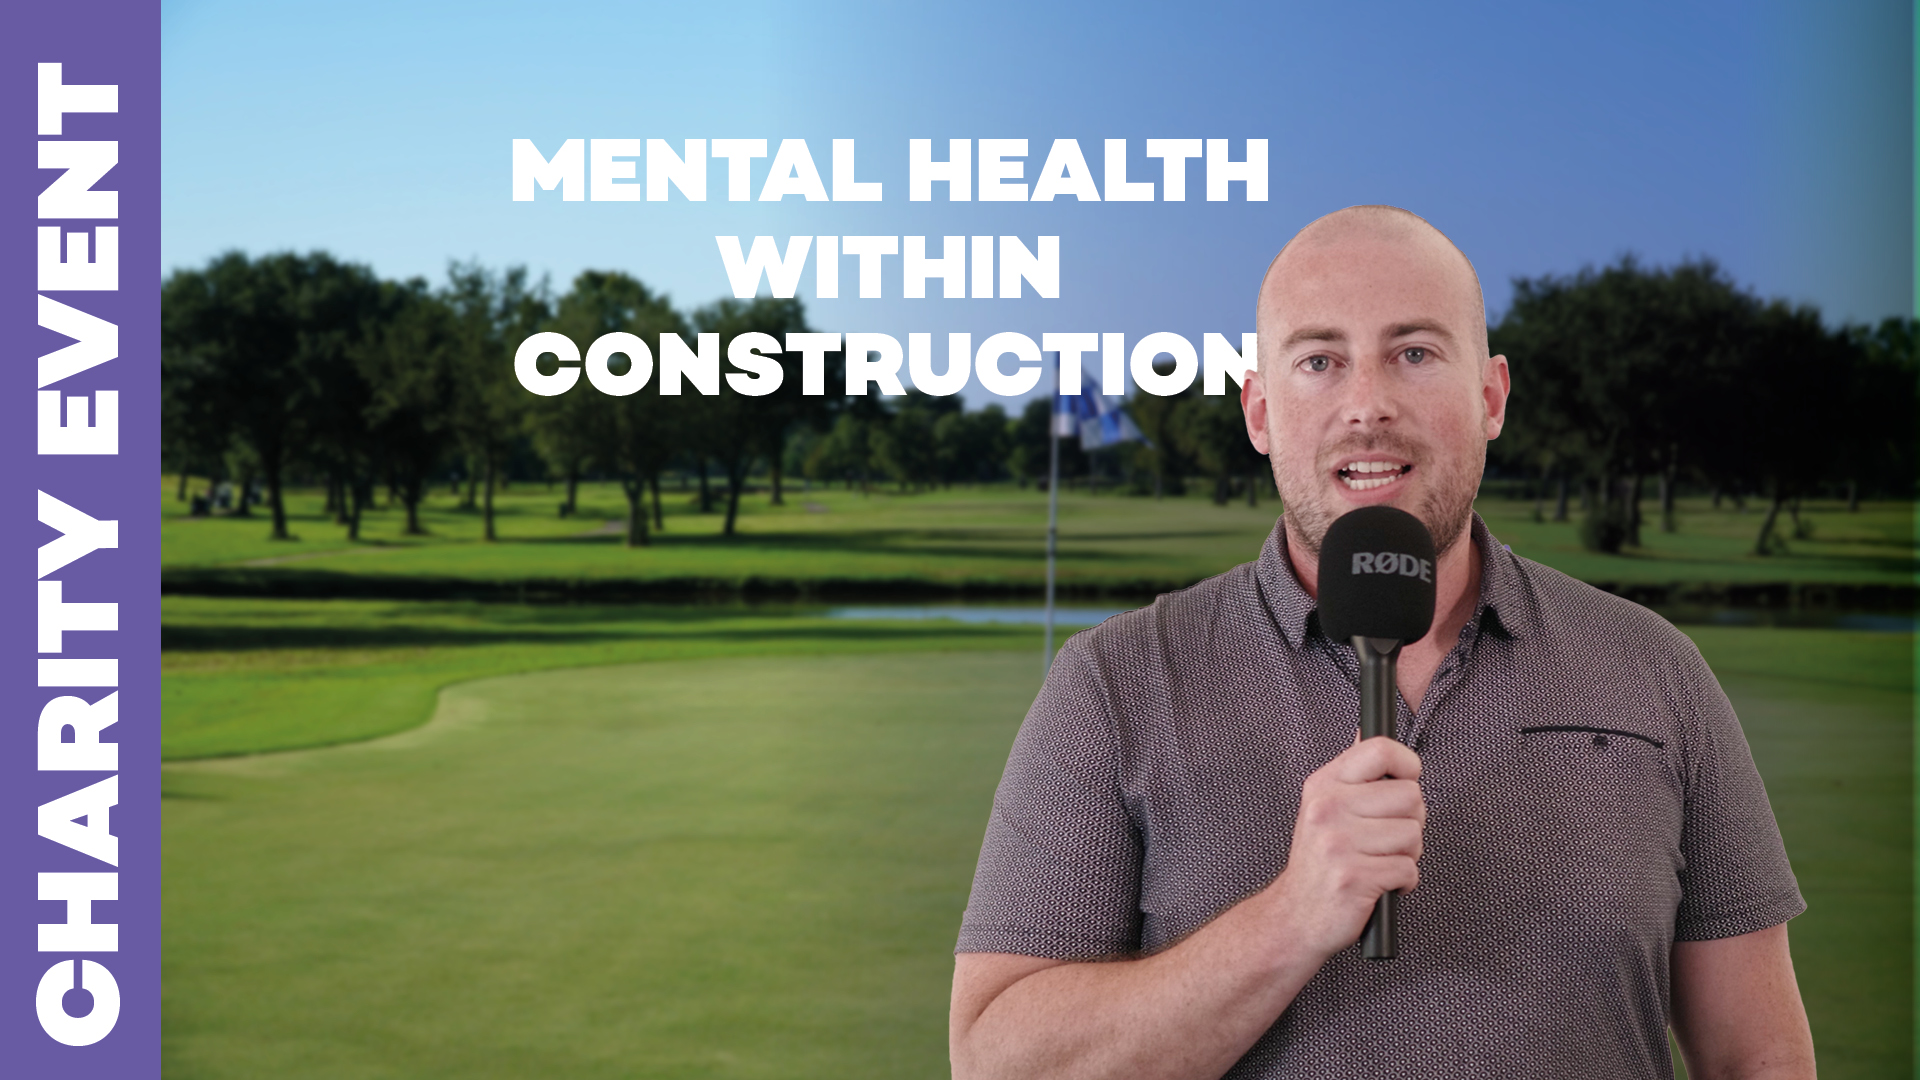 Mental Health with construction 2